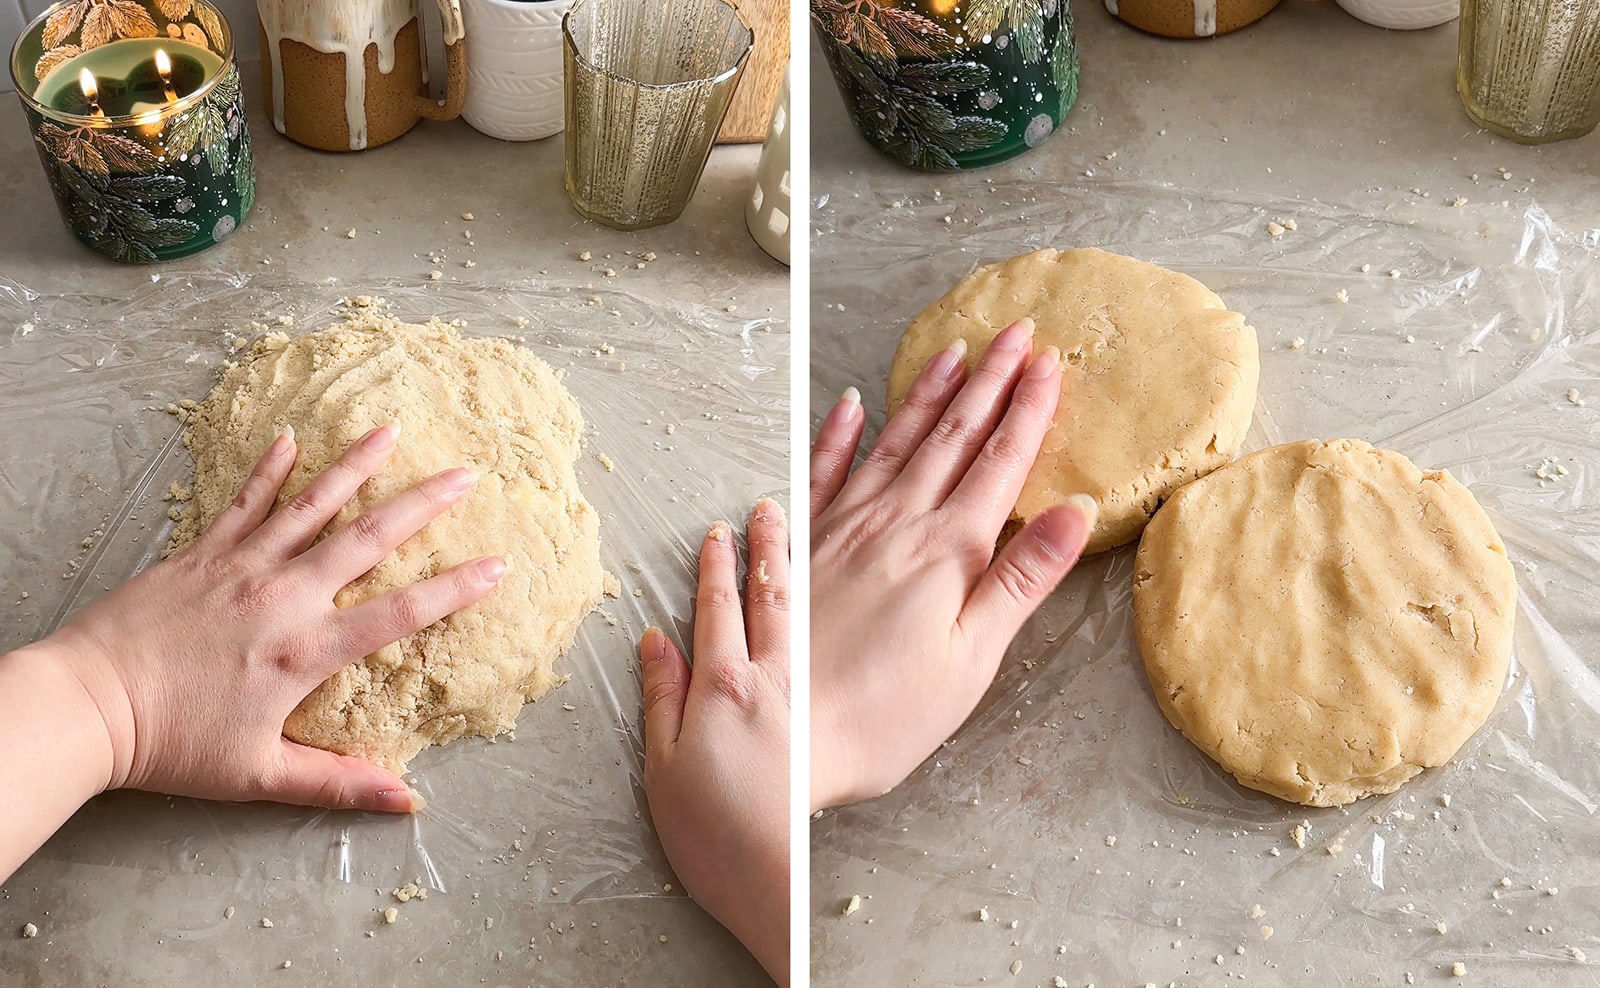 Left to right: hand pressing down on dough, two discs of dough with a hand pressing down on one of them.